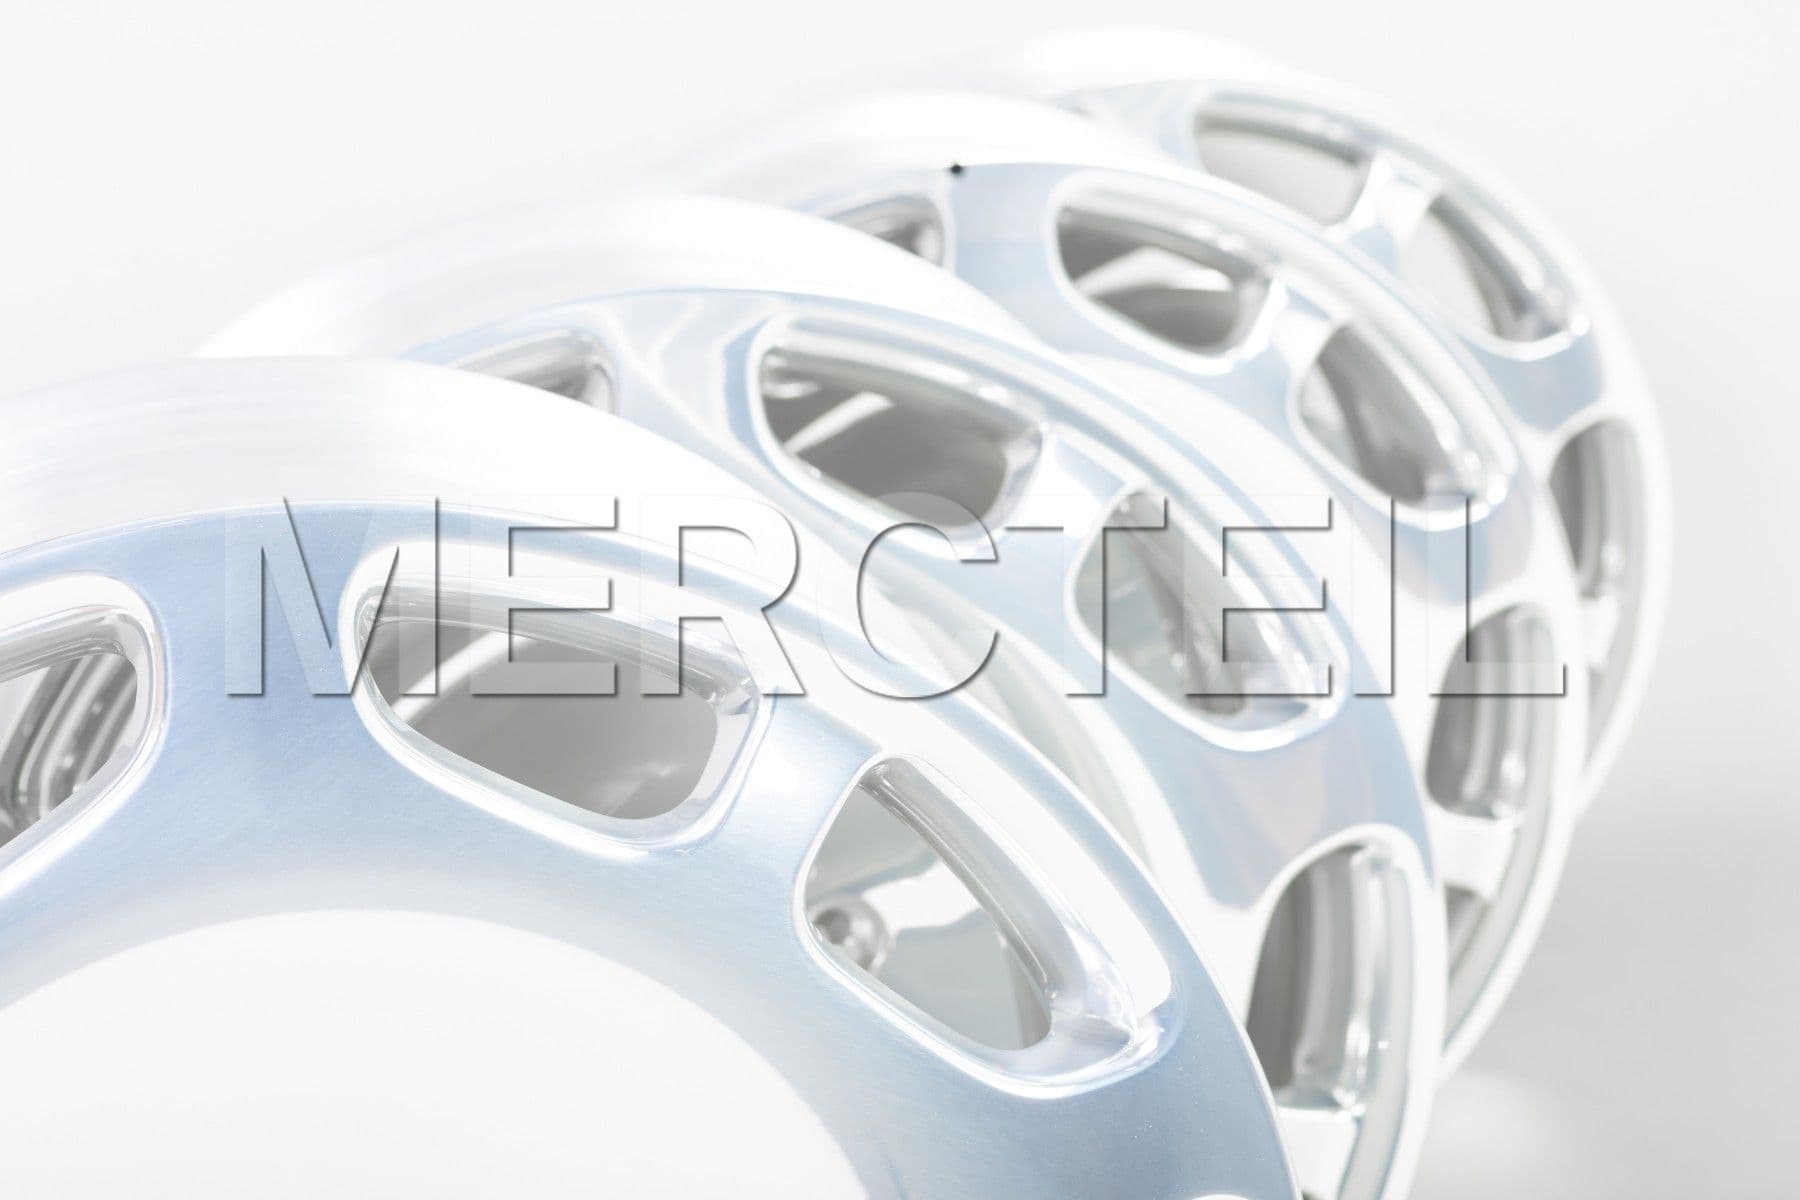 S Class Maybach Wheels Chrome 20 Inch W222 Genuine Mercedes-Benz (part number: A22240116007X15)